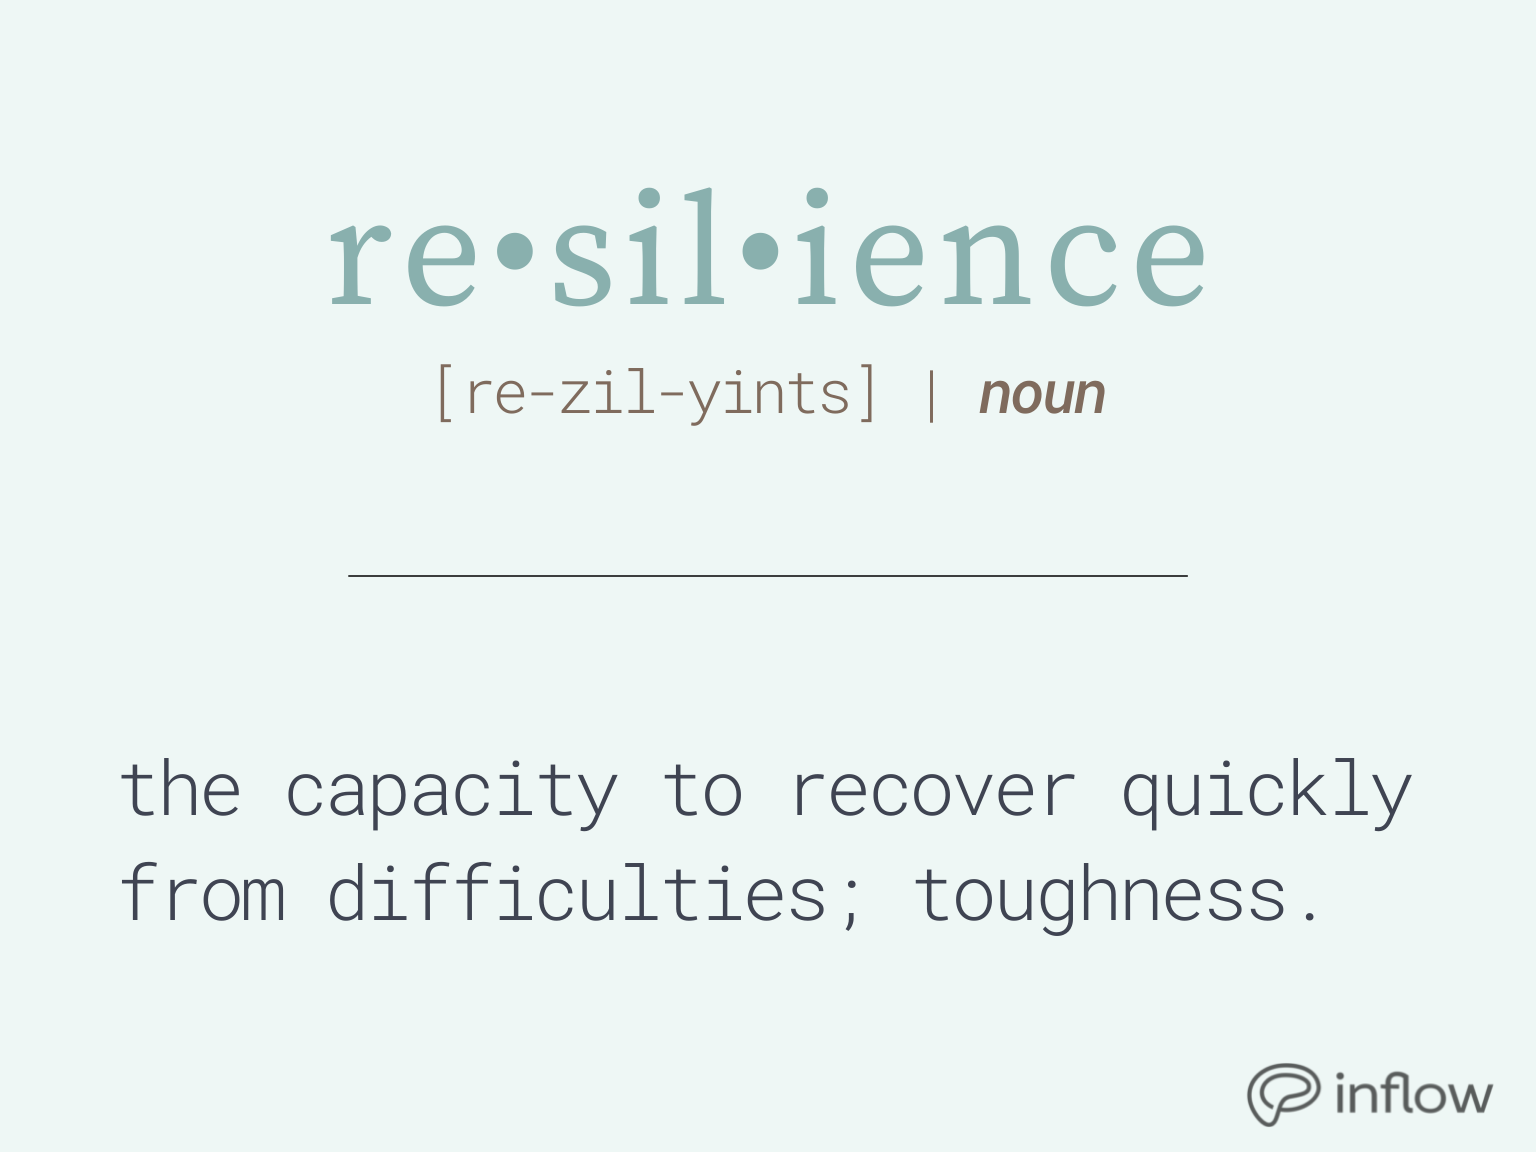 Definition of resilience (noun): the capacity to recover quickly from difficulties; toughness.